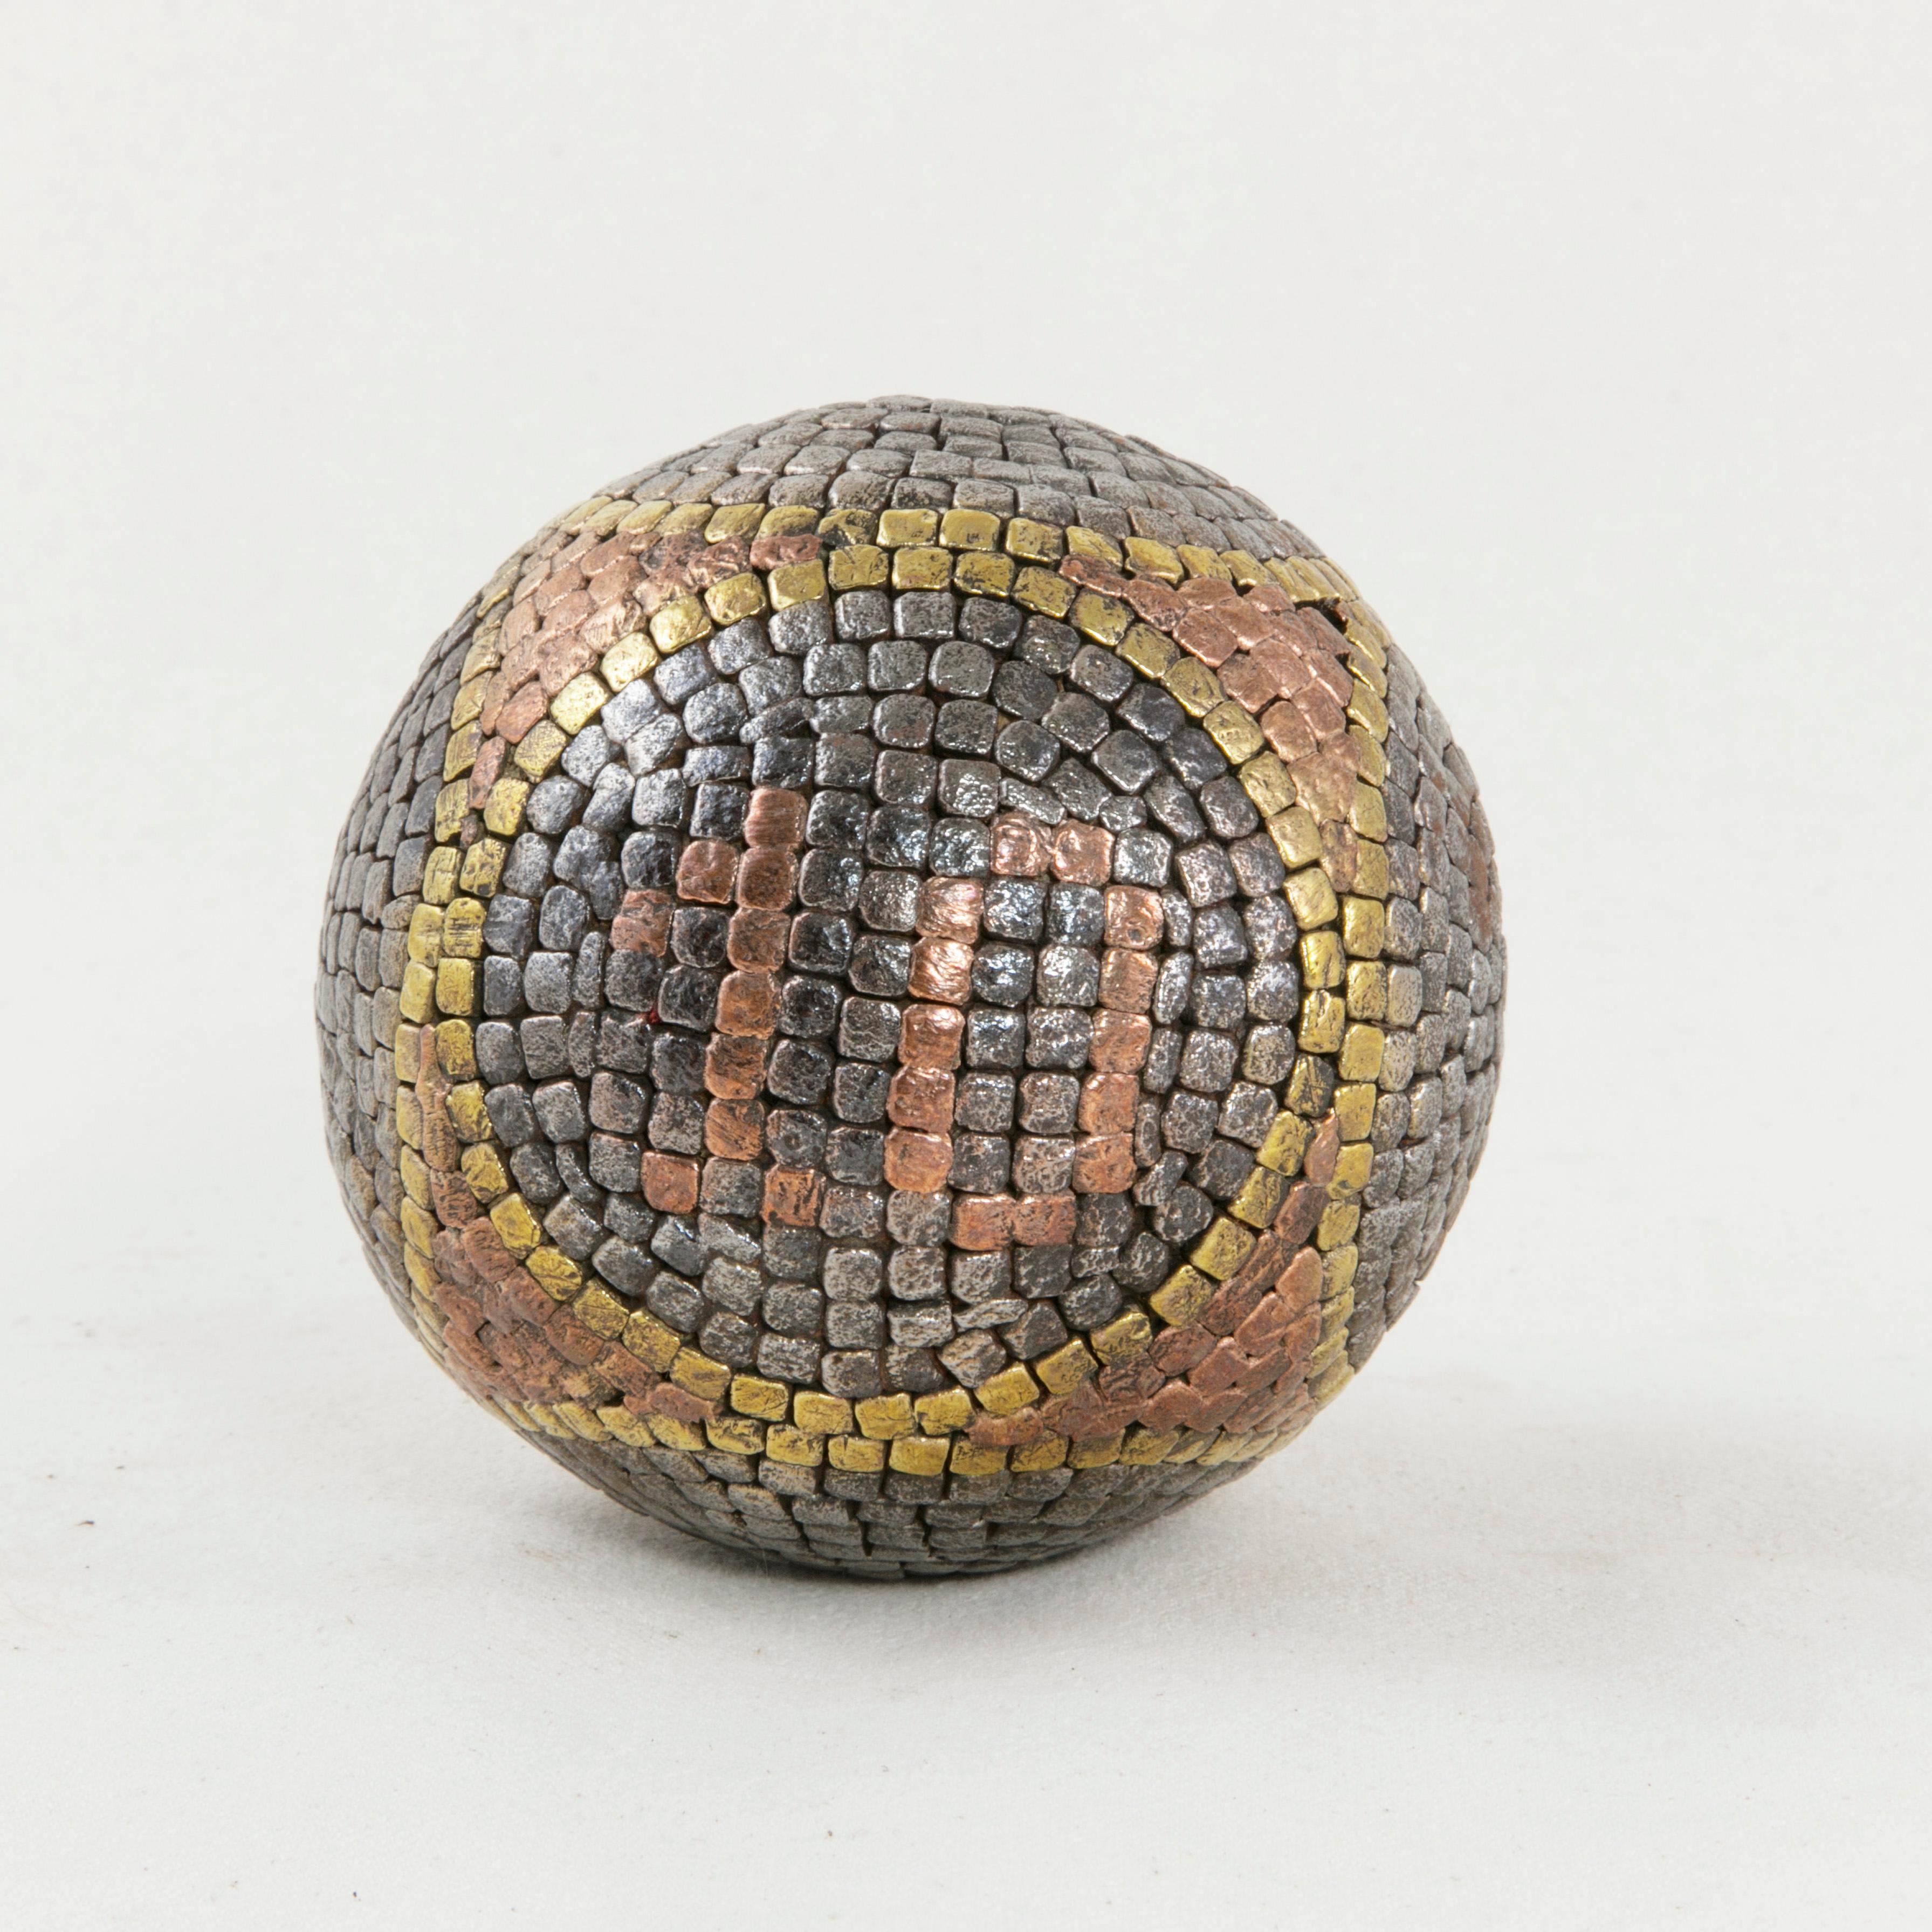 This French artisan-made petanque ball from the early twentieth century features copper, brass, and steel stud nails that form six circles around its wooden core. In one of the circles are copper studs that form the number 10. Petanque is a lawn